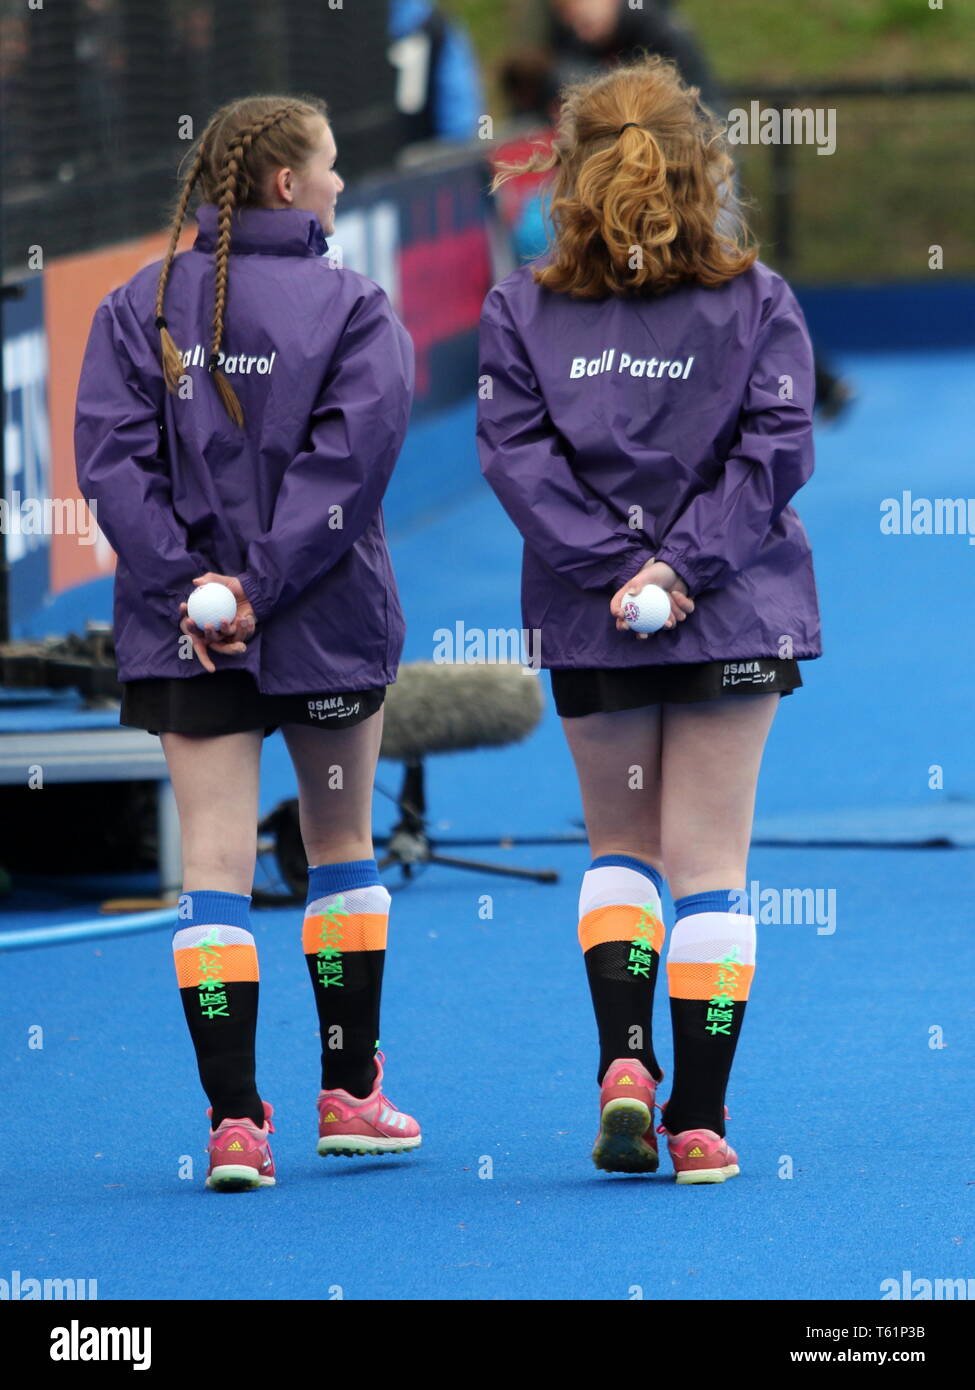 Ball patrol for the 2019 FIH Pro League Great Britain v United States women’s hockey match at Queens Elizabeth Olympic Park, London. 27th April 2019. Stock Photo